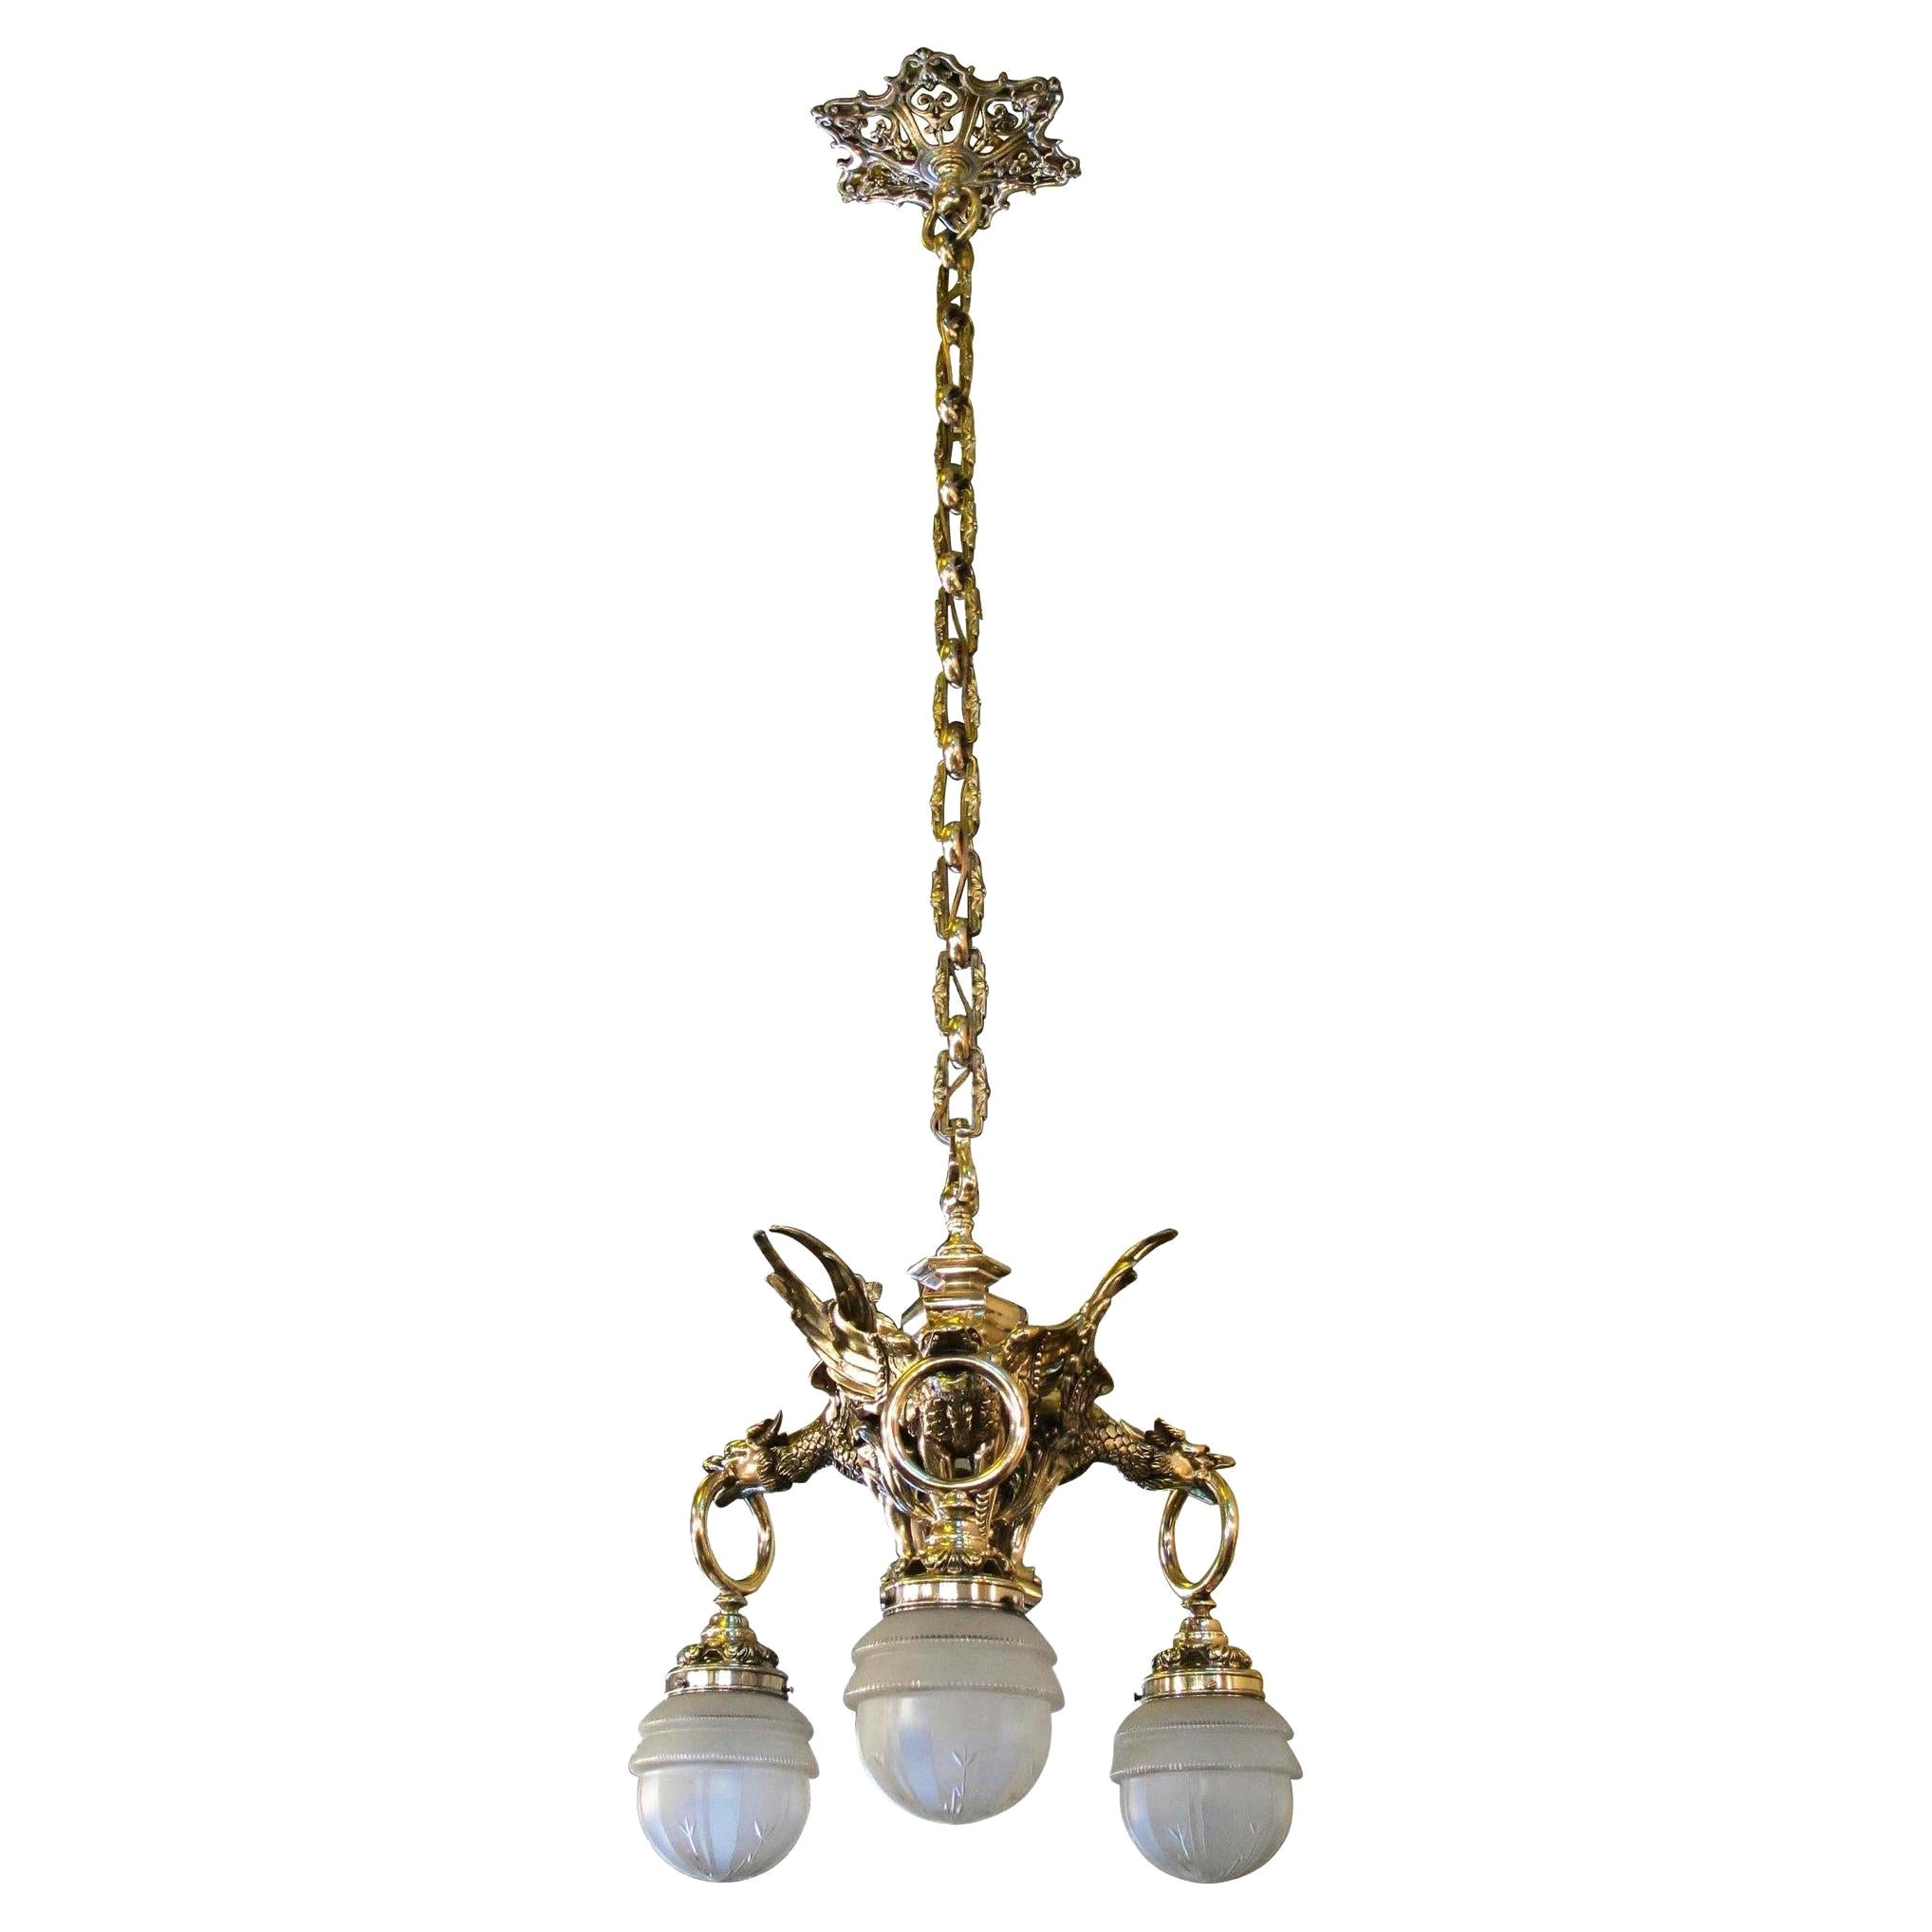 Chandelier Dragons, Viennese Secession, 1900, Silver Plated Bronze